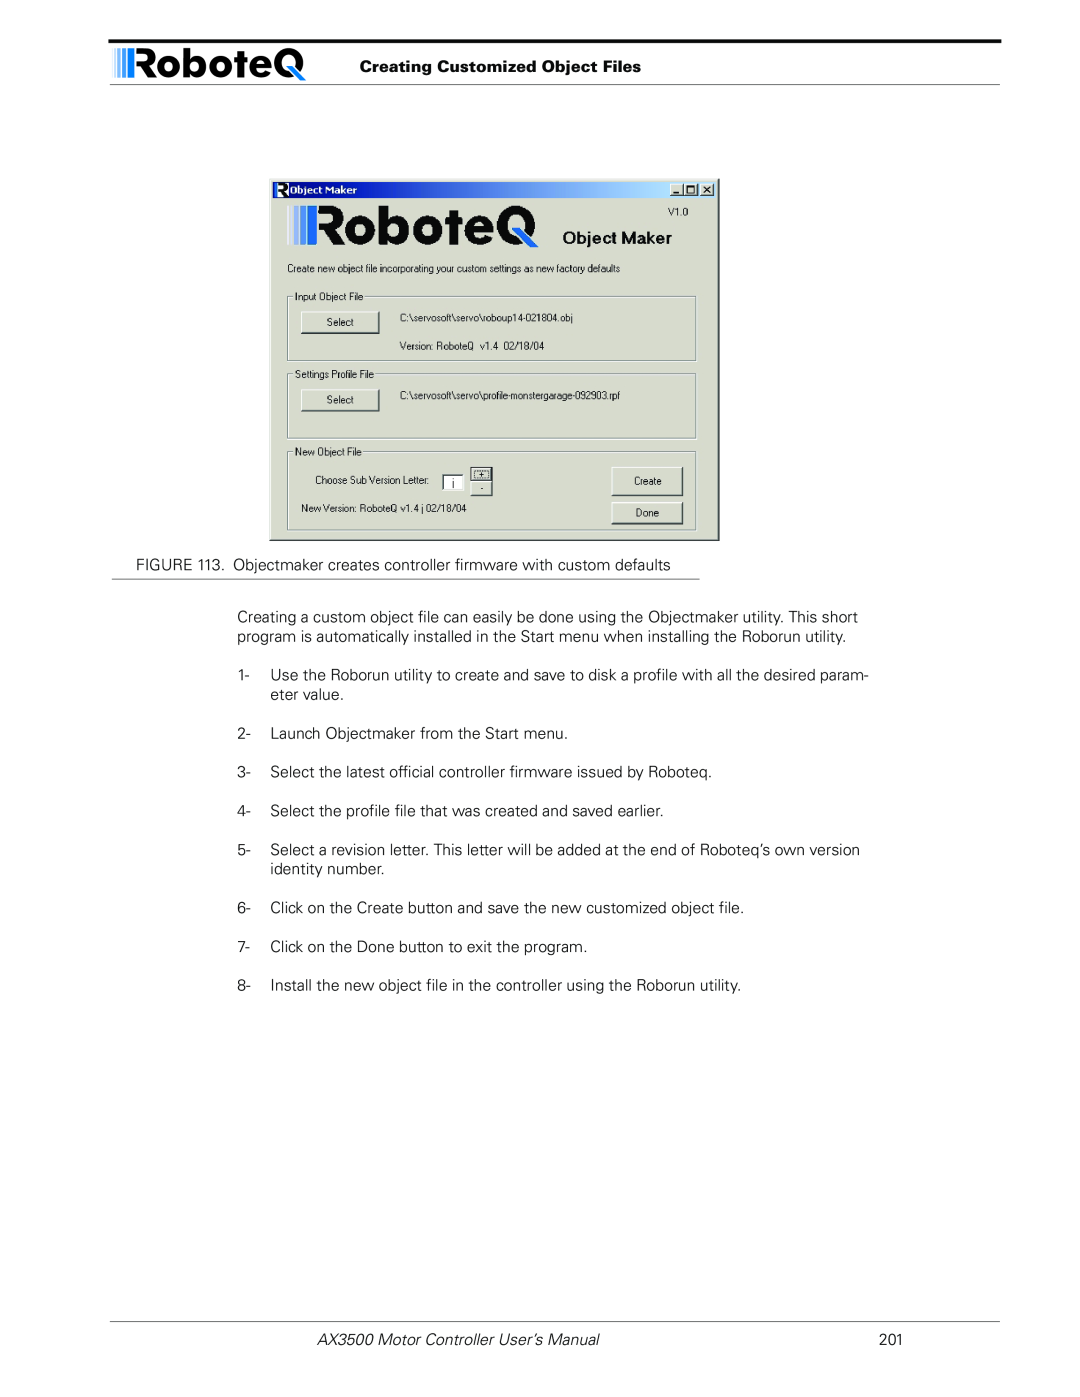 RoboteQ user manual Creating Customized Object Files, AX3500 Motor Controller User’s Manual 